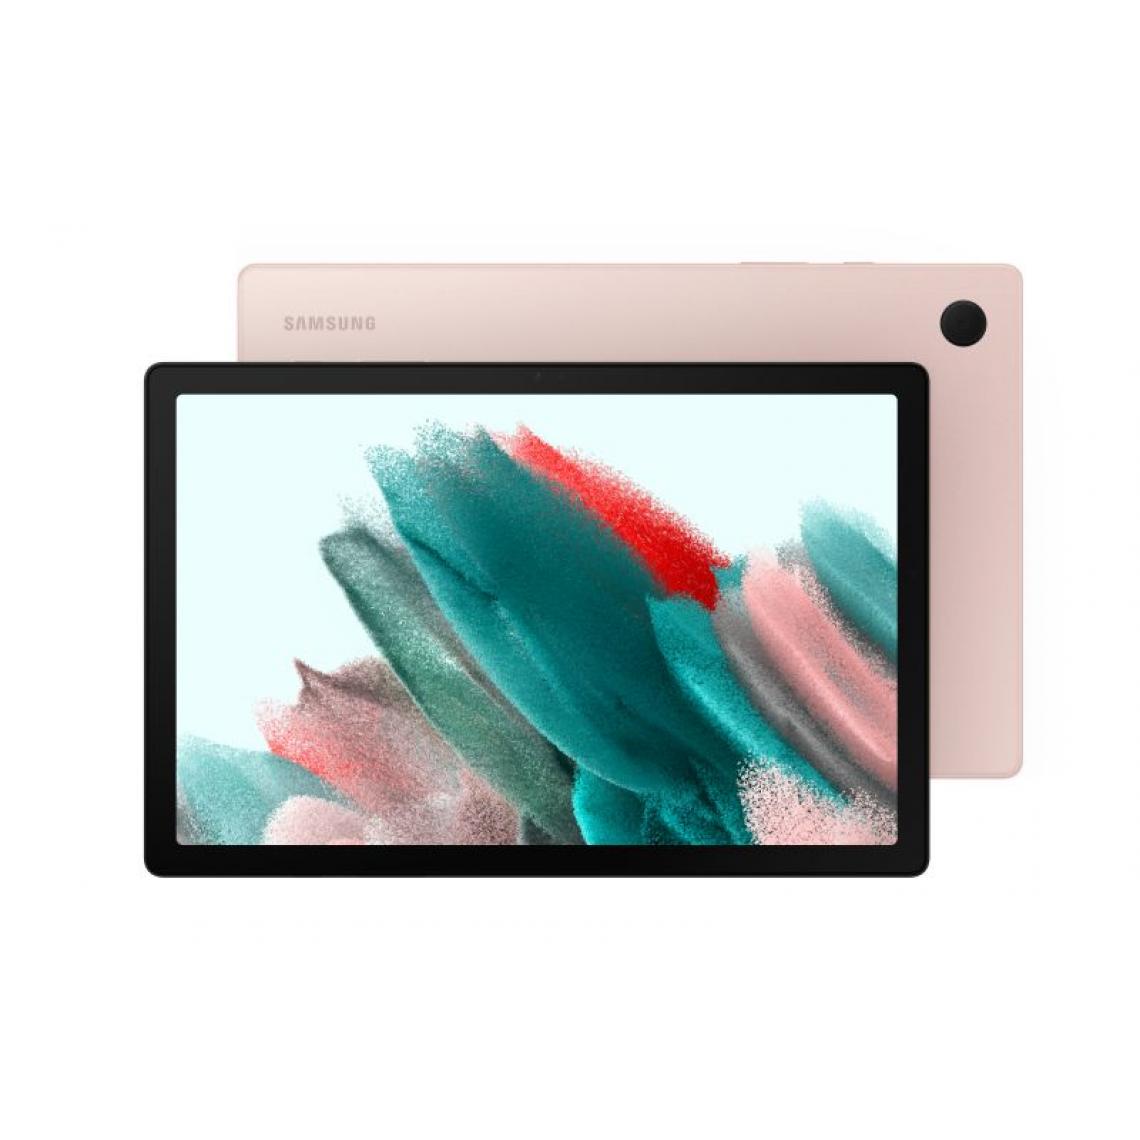 Inconnu - Samsung Galaxy Tab A8 SM-X205N 4G LTE 32 Go 26,7 cm (10.5``) Tigre 3 Go Wi-Fi 5 (802.11ac) Android 11 Rose doré - Tablette Android